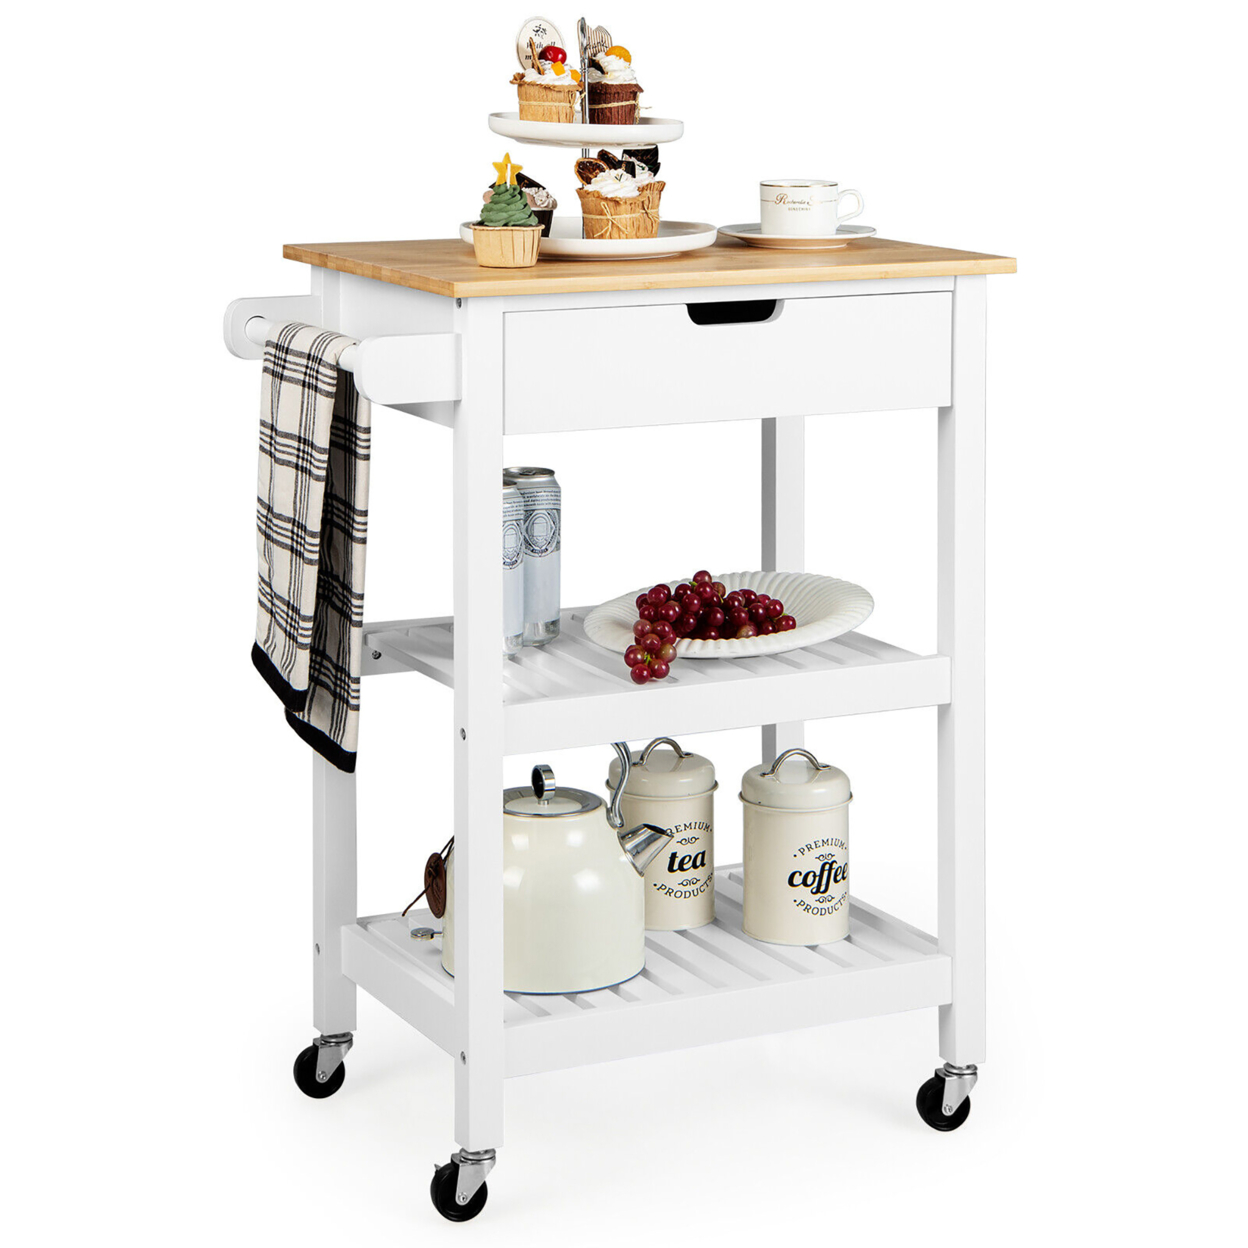 3-Tier Kitchen Island Cart Rolling Service Trolley W/ Bamboo Top Shelves - White